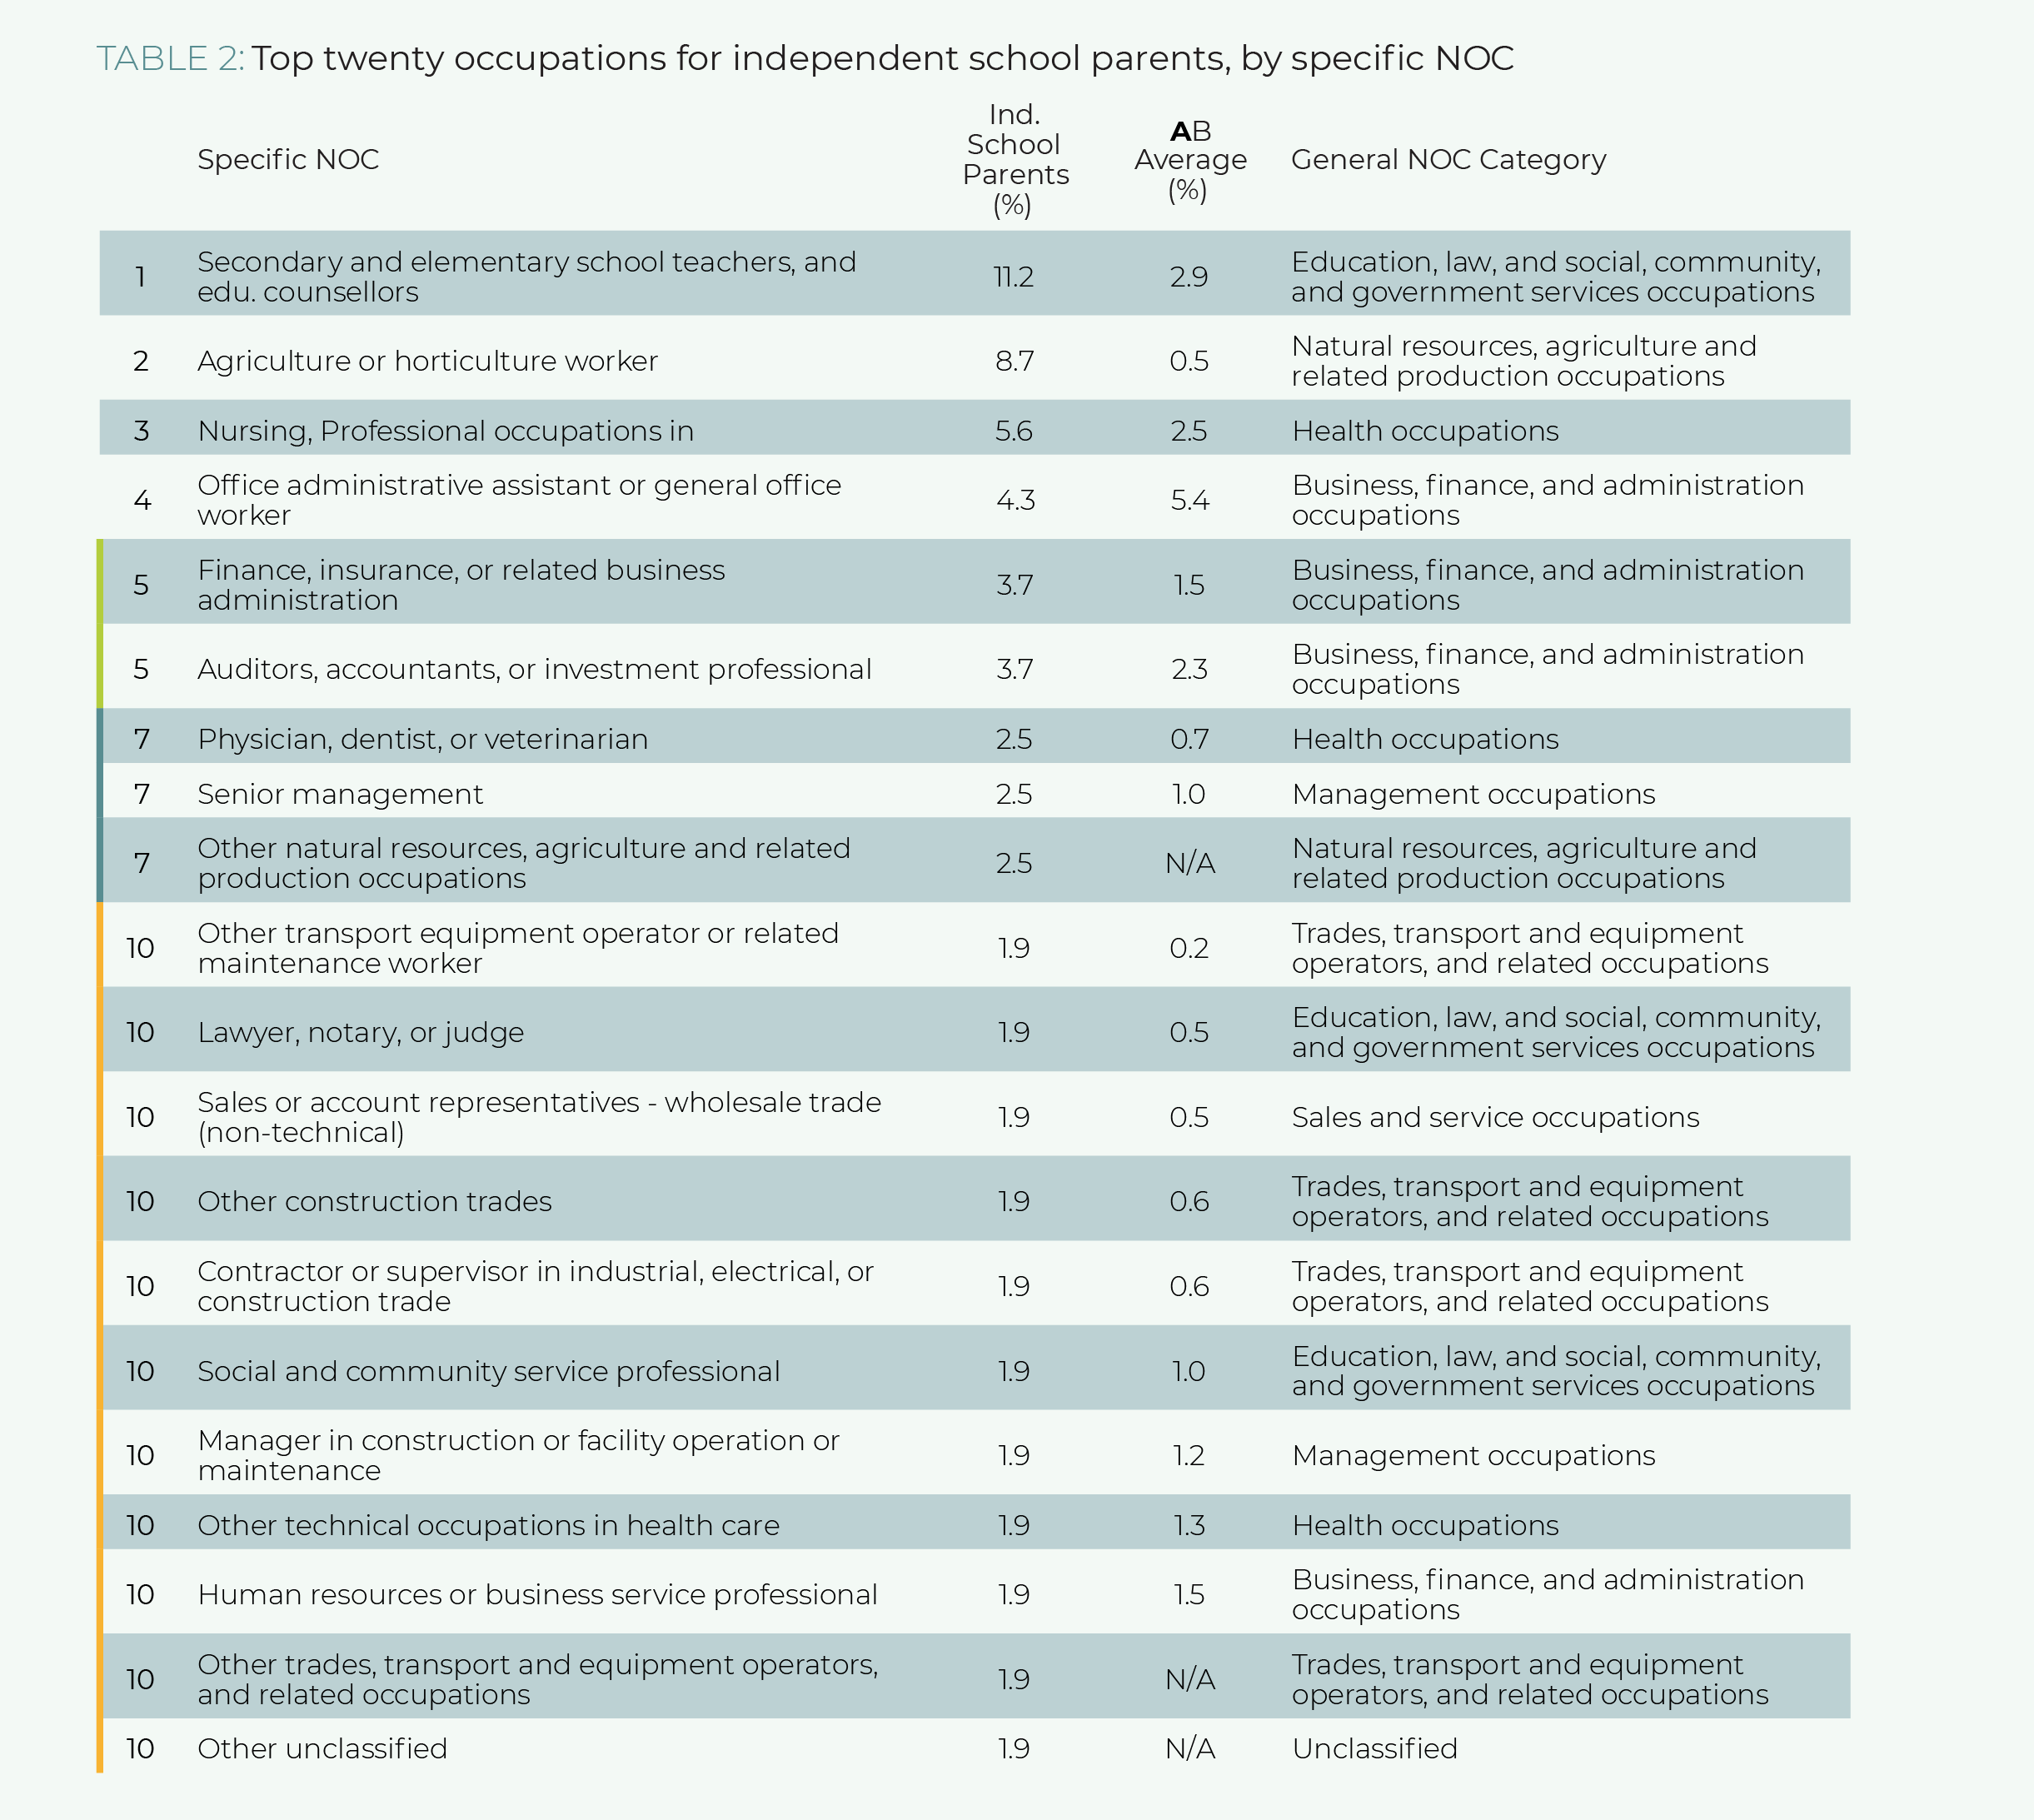 Table 2. Top twenty occupations for independent school parents, by specific NOC